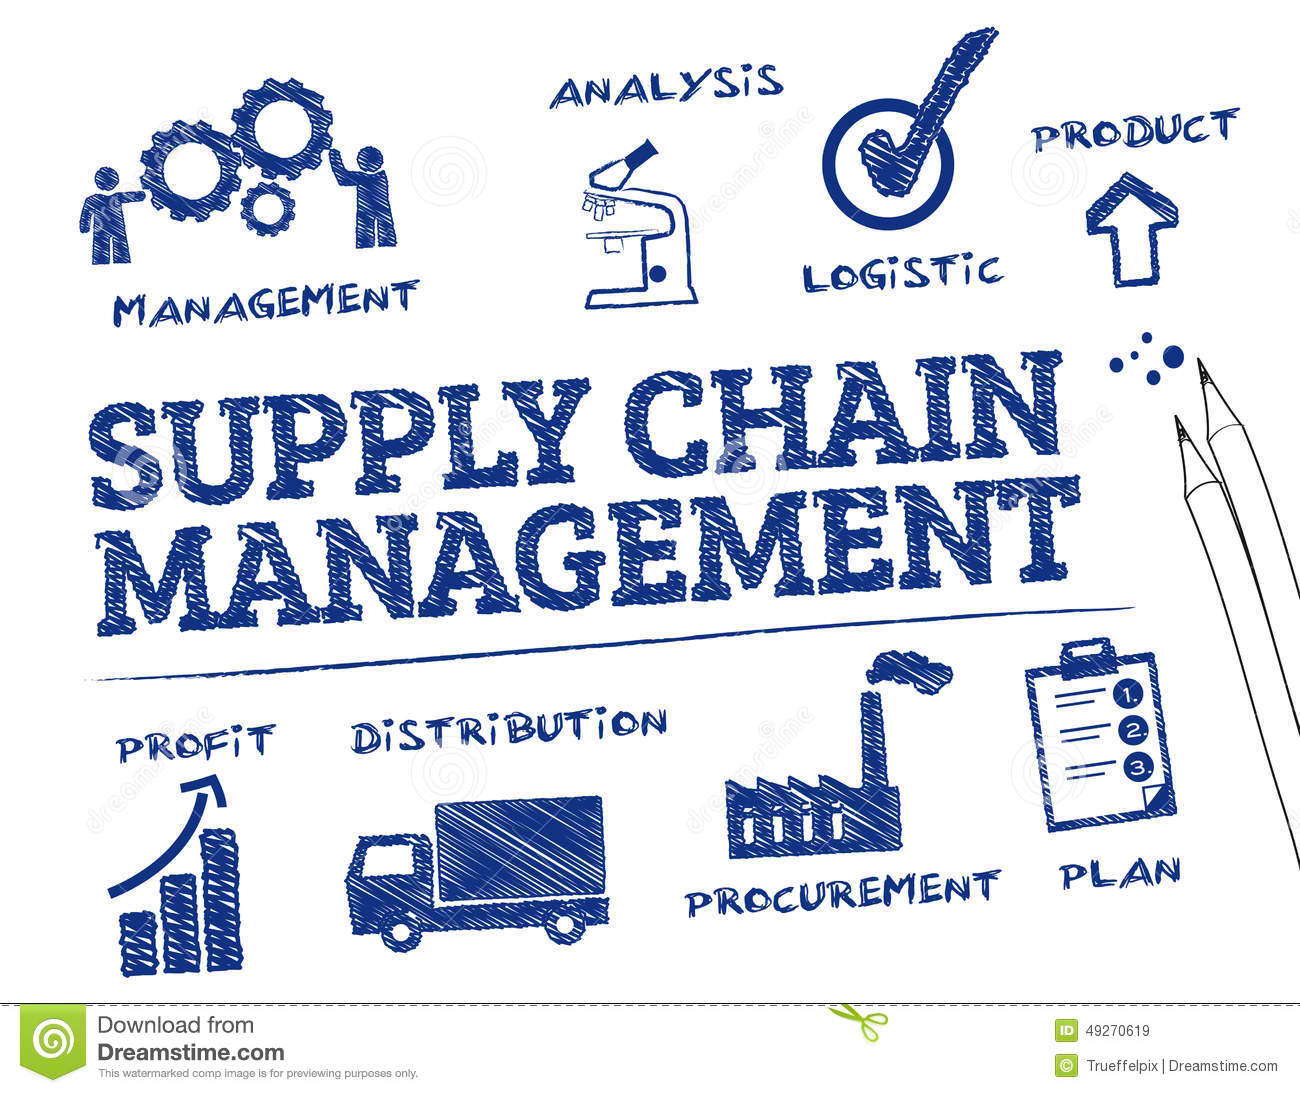 Supply Chain Management in Hospitality Industry